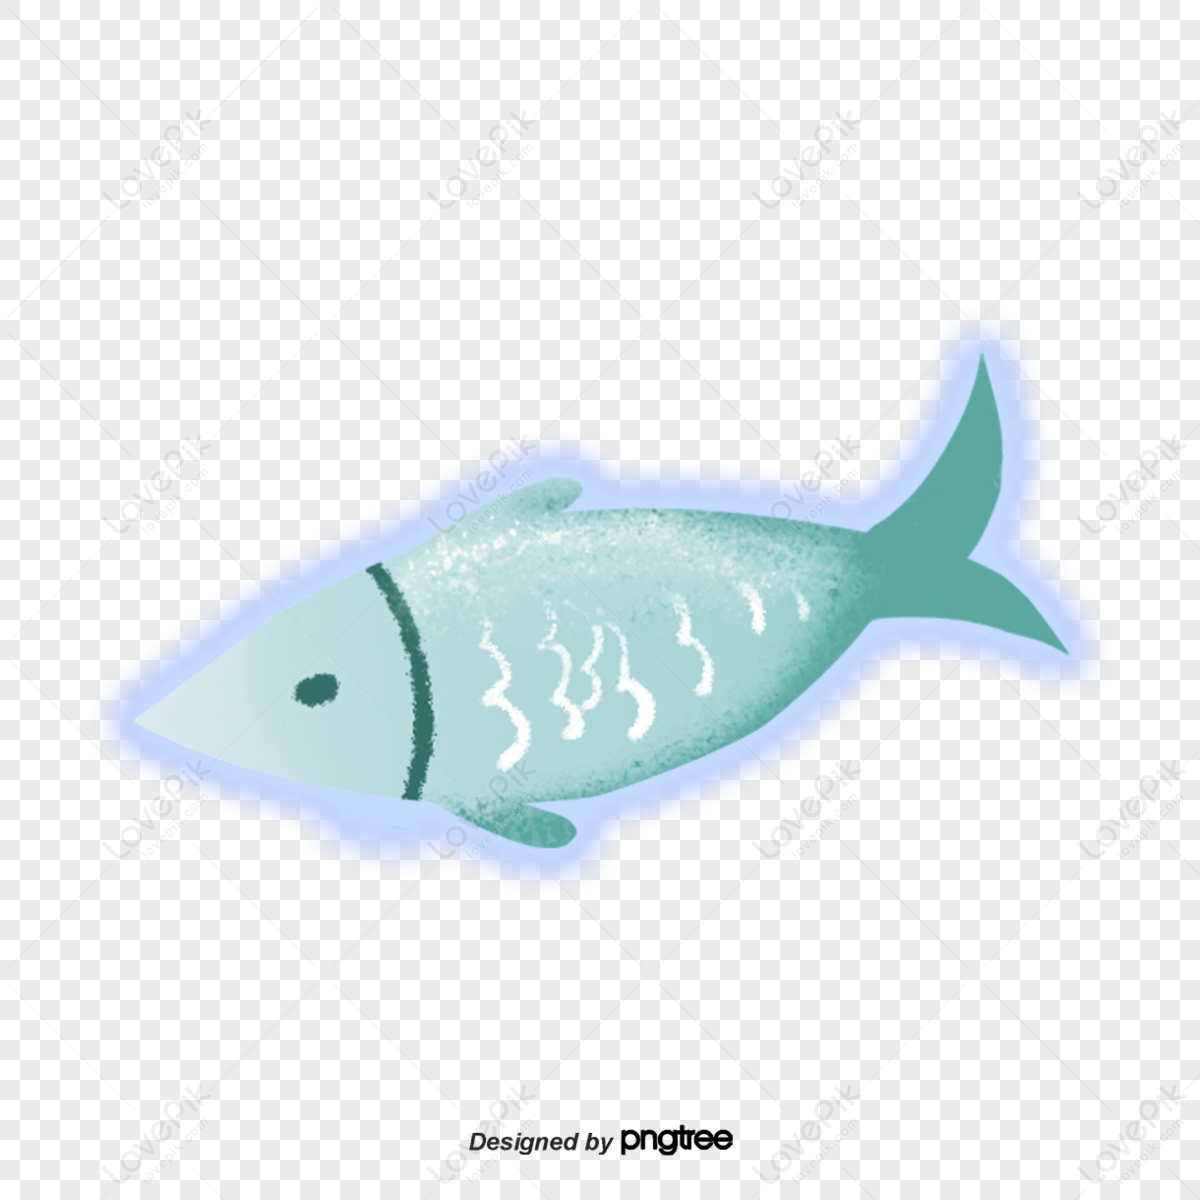 Neon Fish PNG Images With Transparent Background